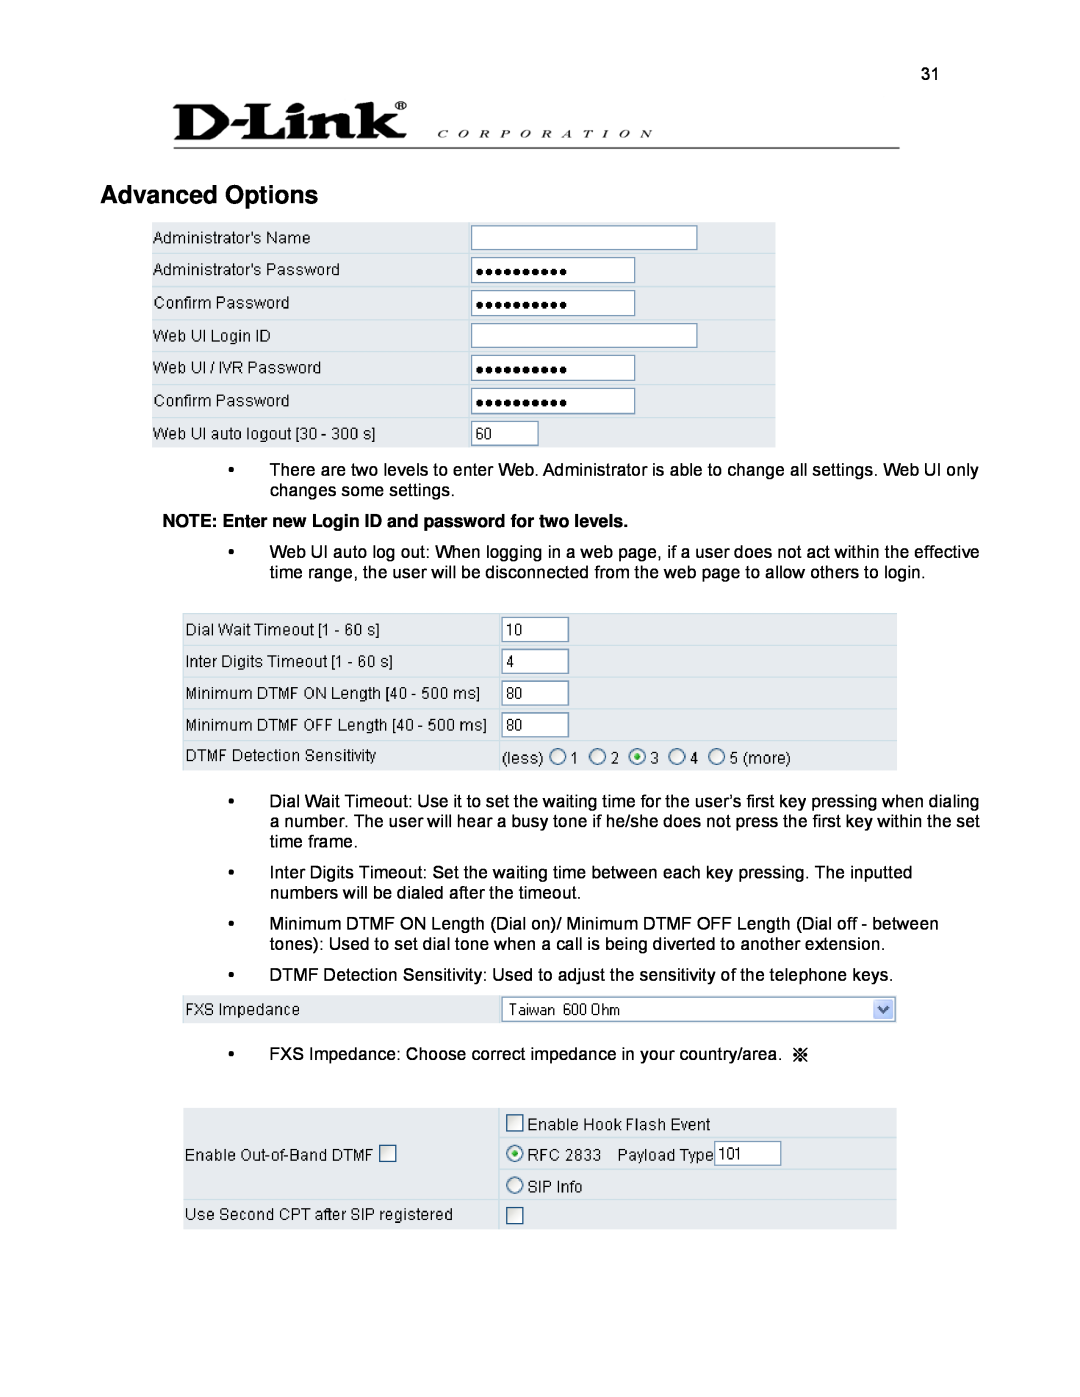 D-Link DVG-2032S user manual Advanced Options, NOTE Enter new Login ID and password for two levels 